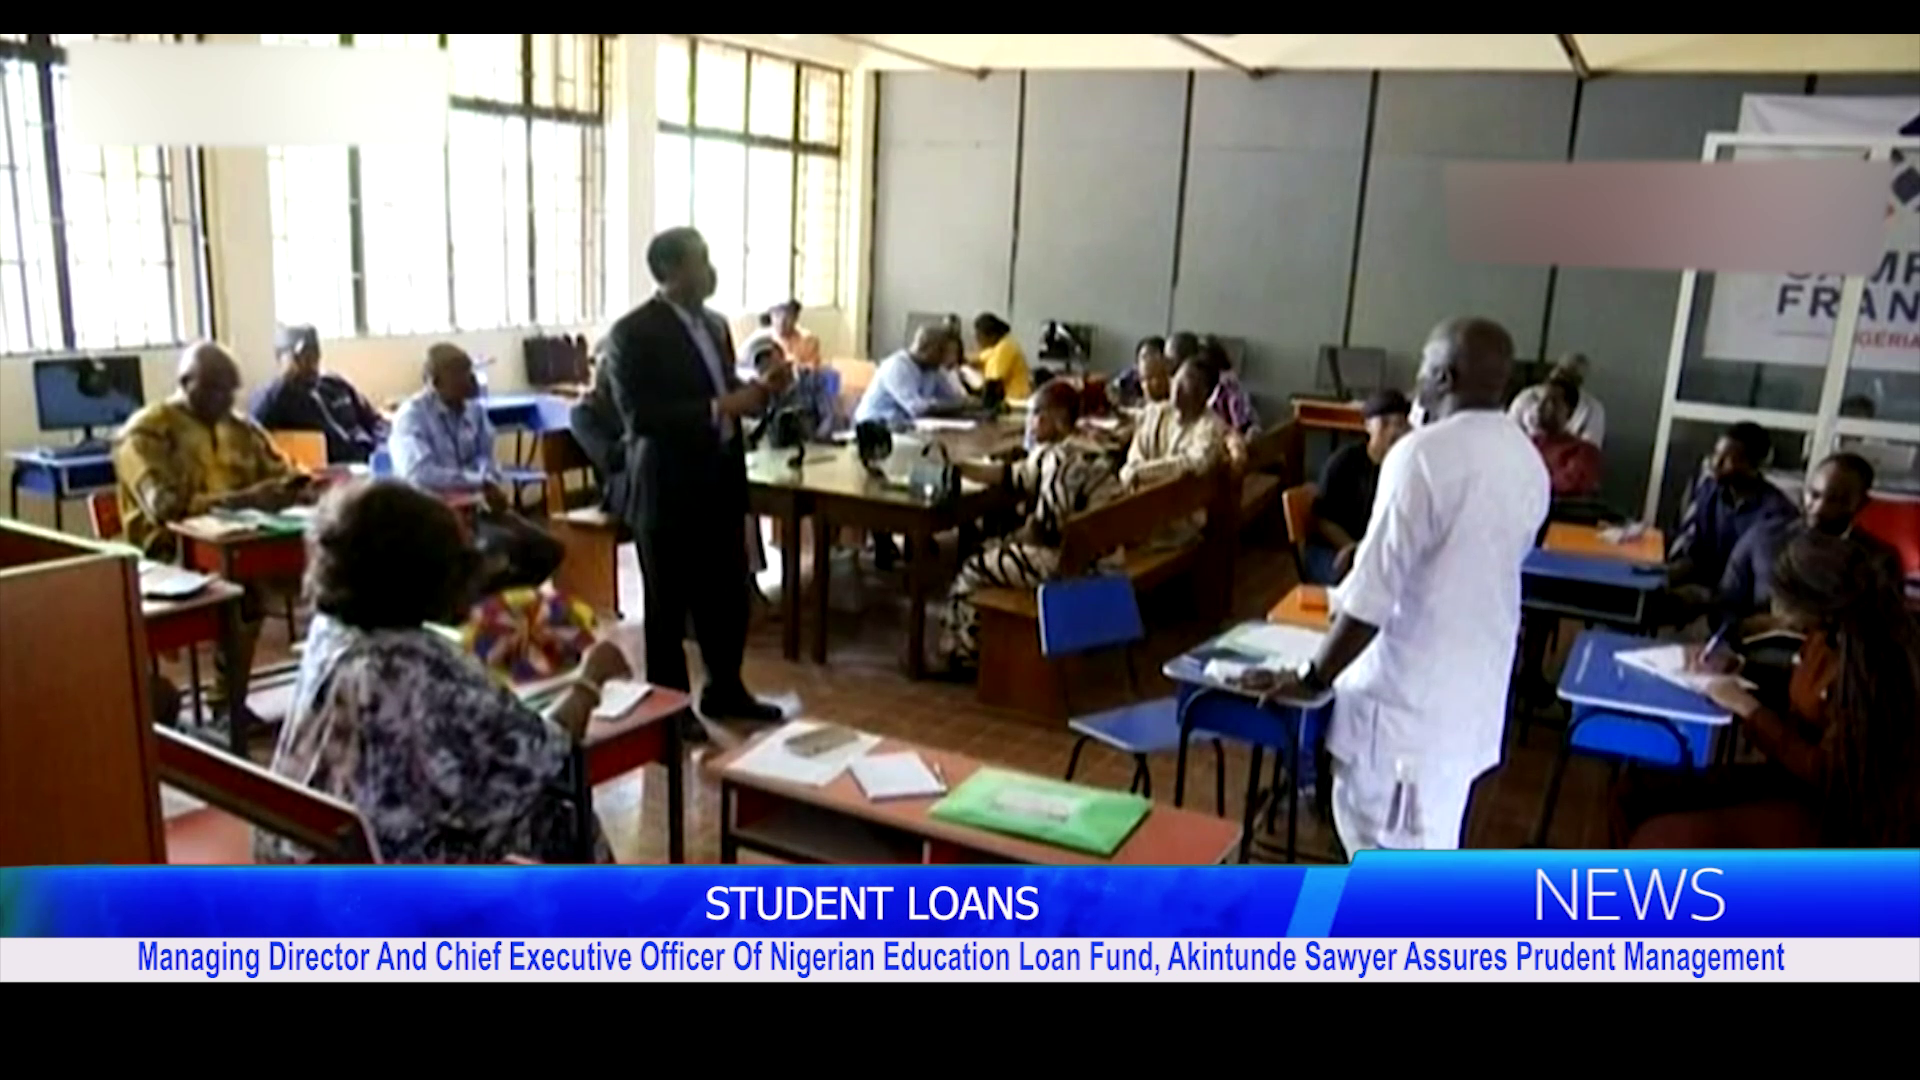 Managing Director And Chief Executive Officer Of Nigerian Education Loan Fund, Akintunde Sawyer Assures Prudent Management